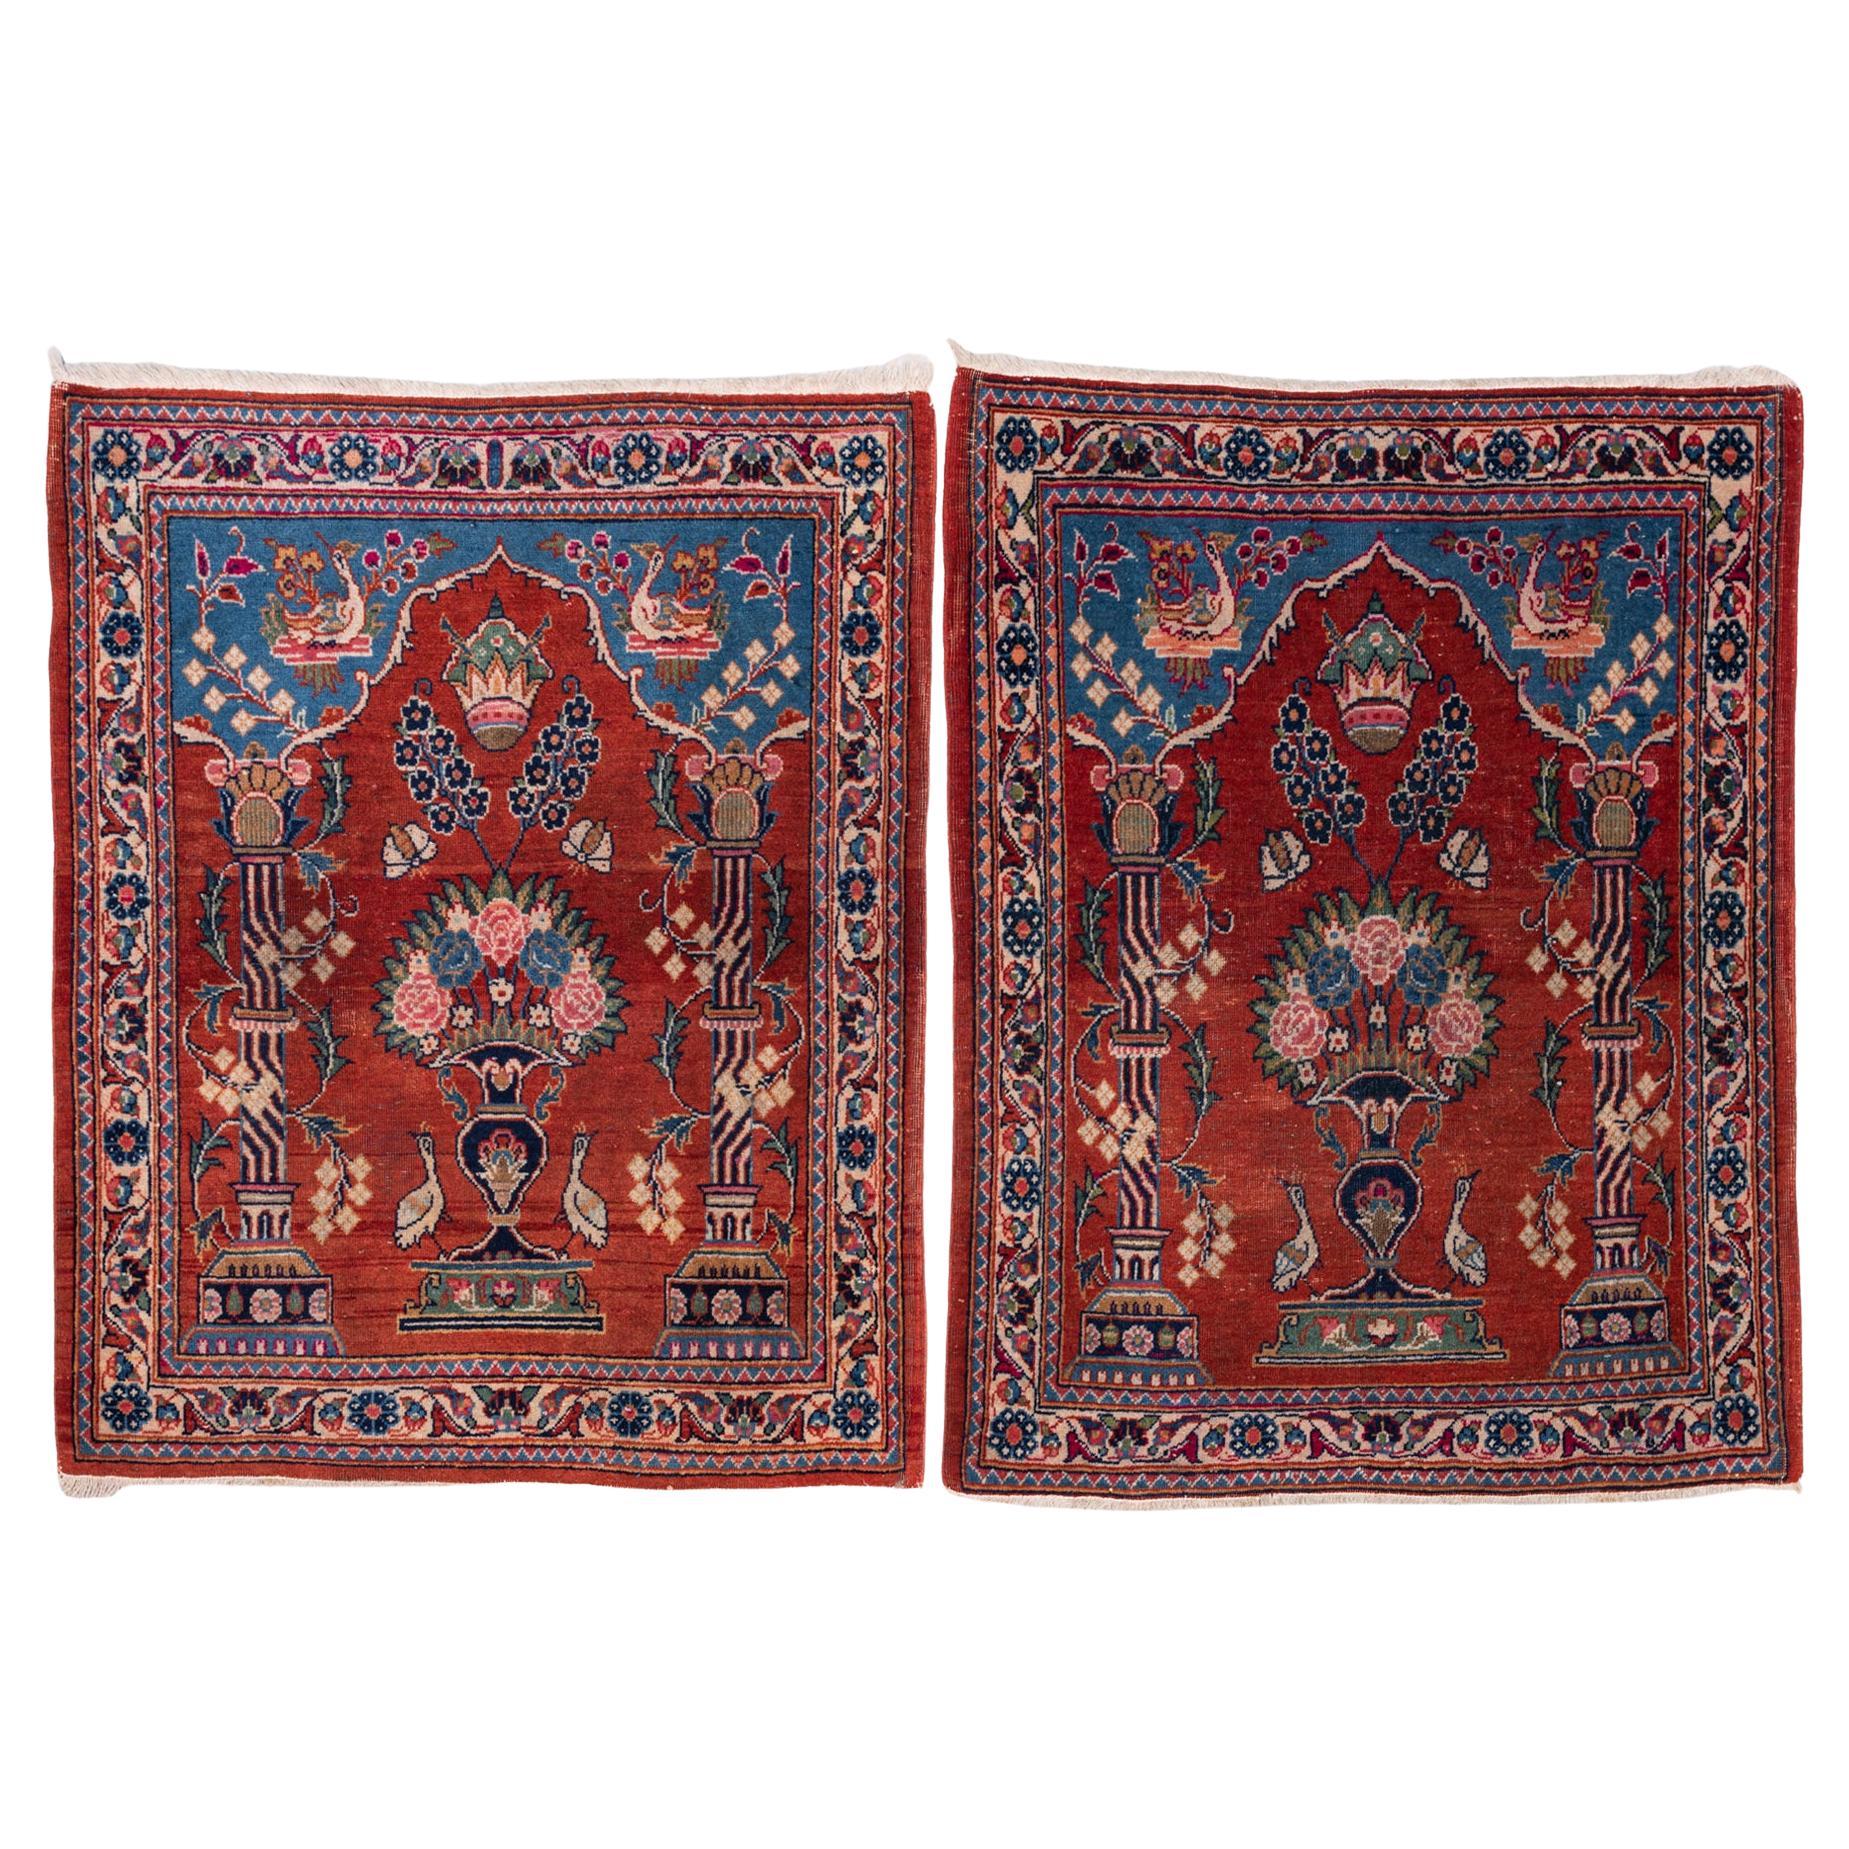 Pair of Antique Oriental Carpets with Qajar Dynasty Crown